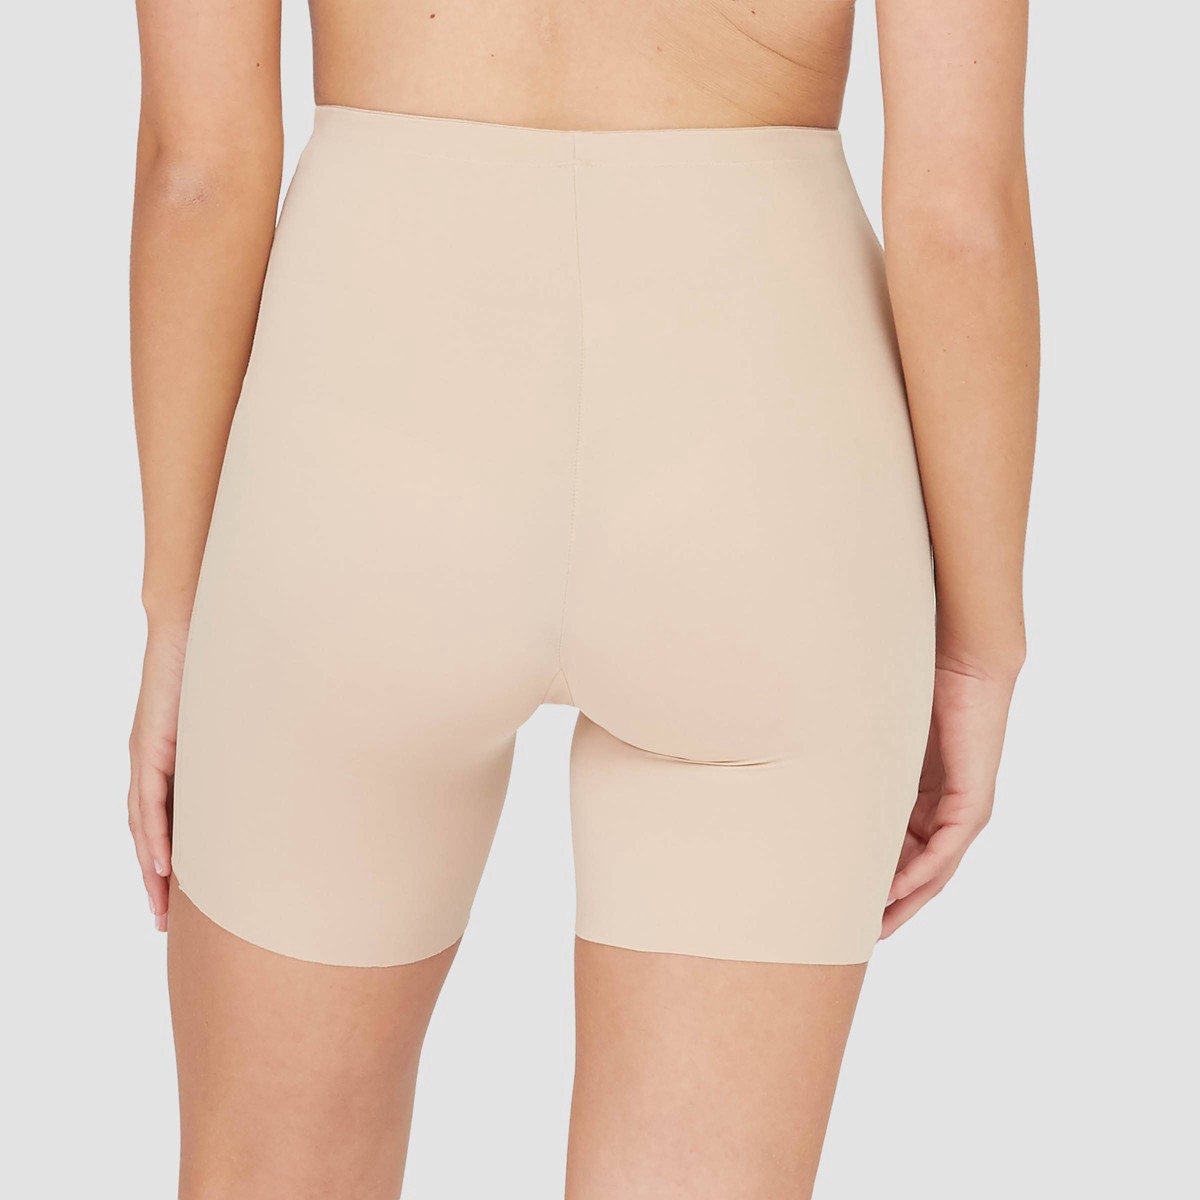 slide 4 of 4, ASSETS by SPANX Women's Thintuition Shaping Mid-Thigh Slimmer - Beige XL, 1 ct